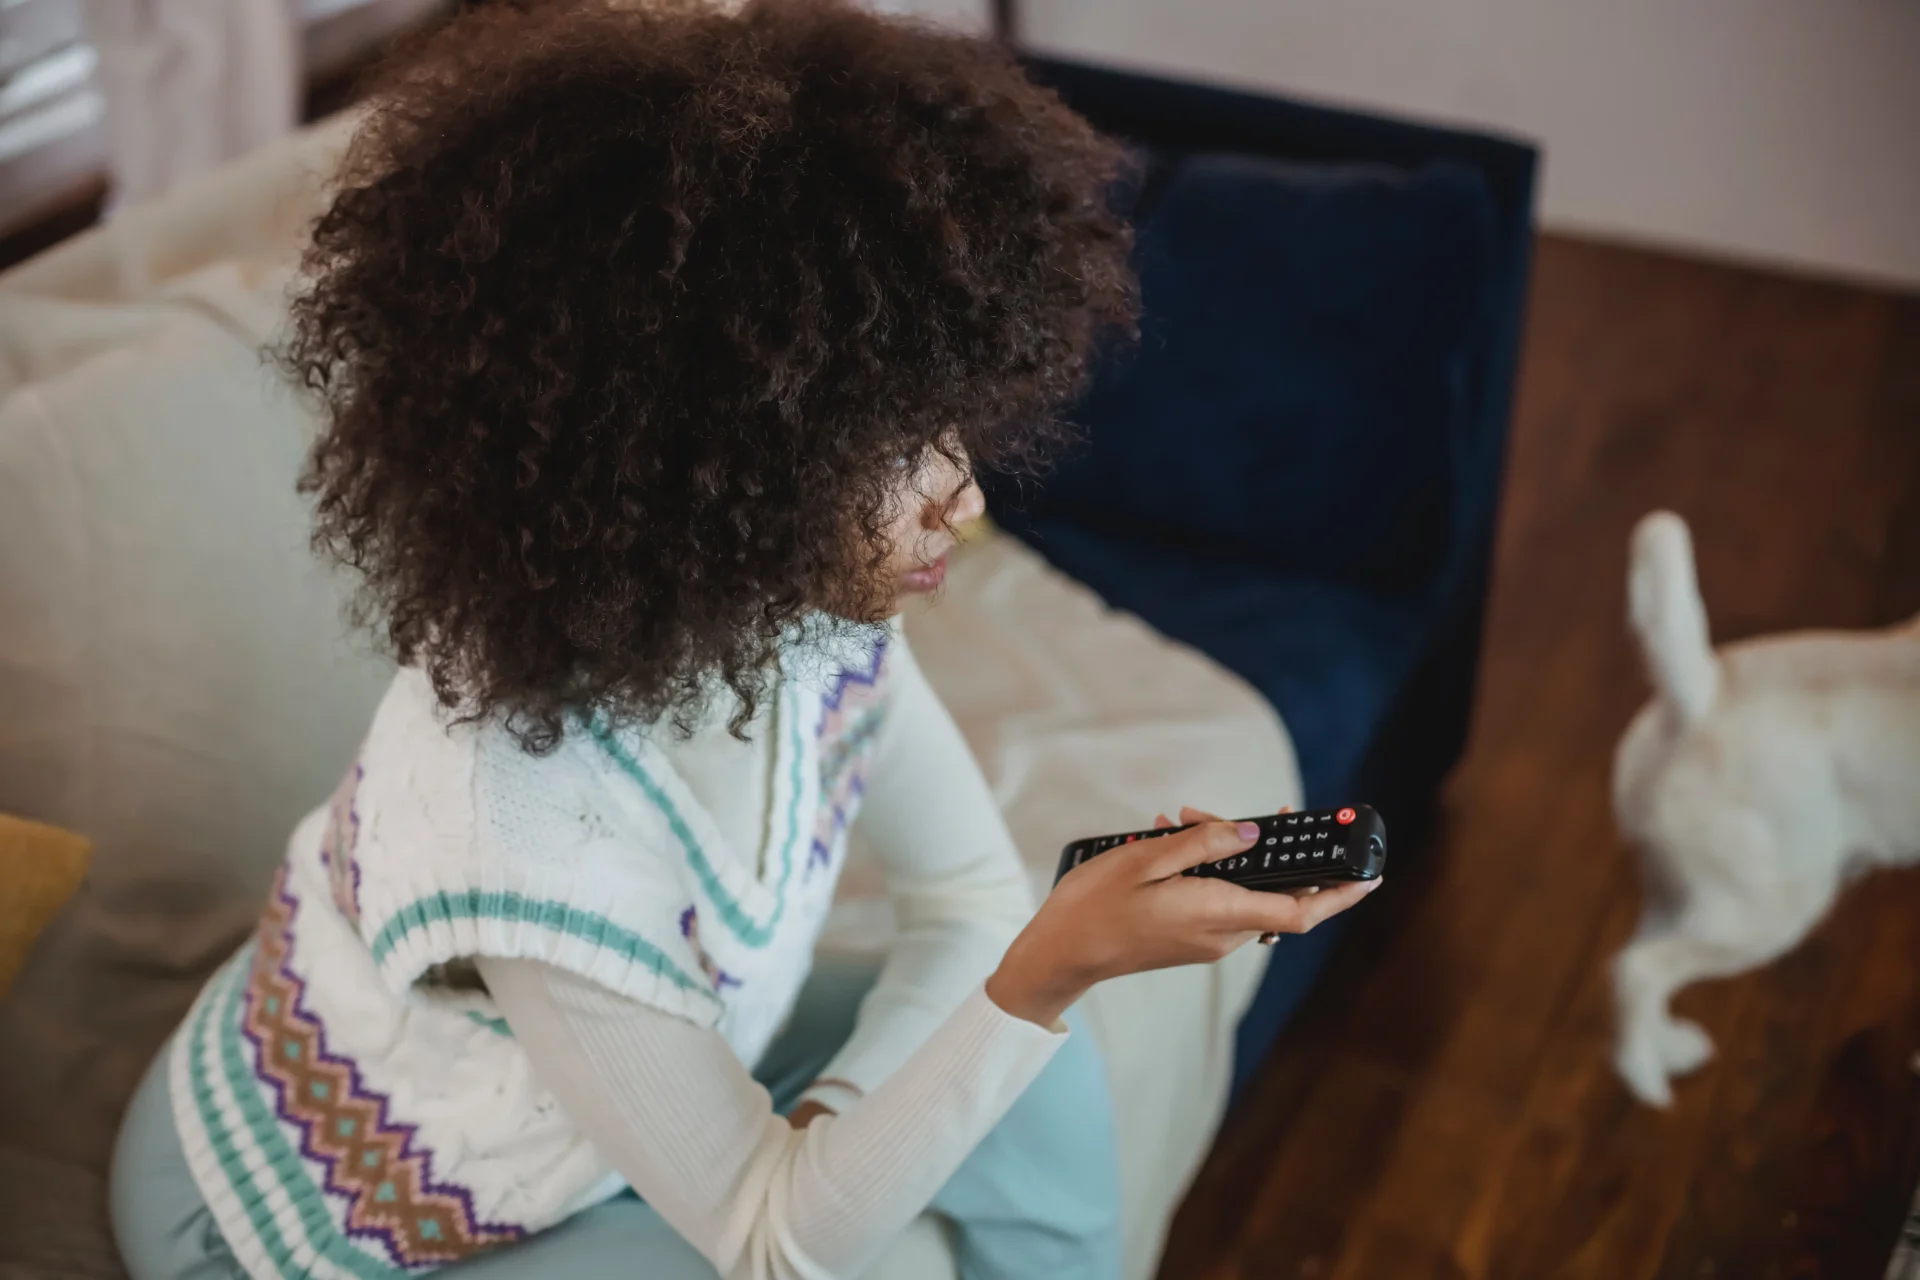 A woman sitting on the couch watching TV and holding a remote control, with reference to the introduction of online freeview.